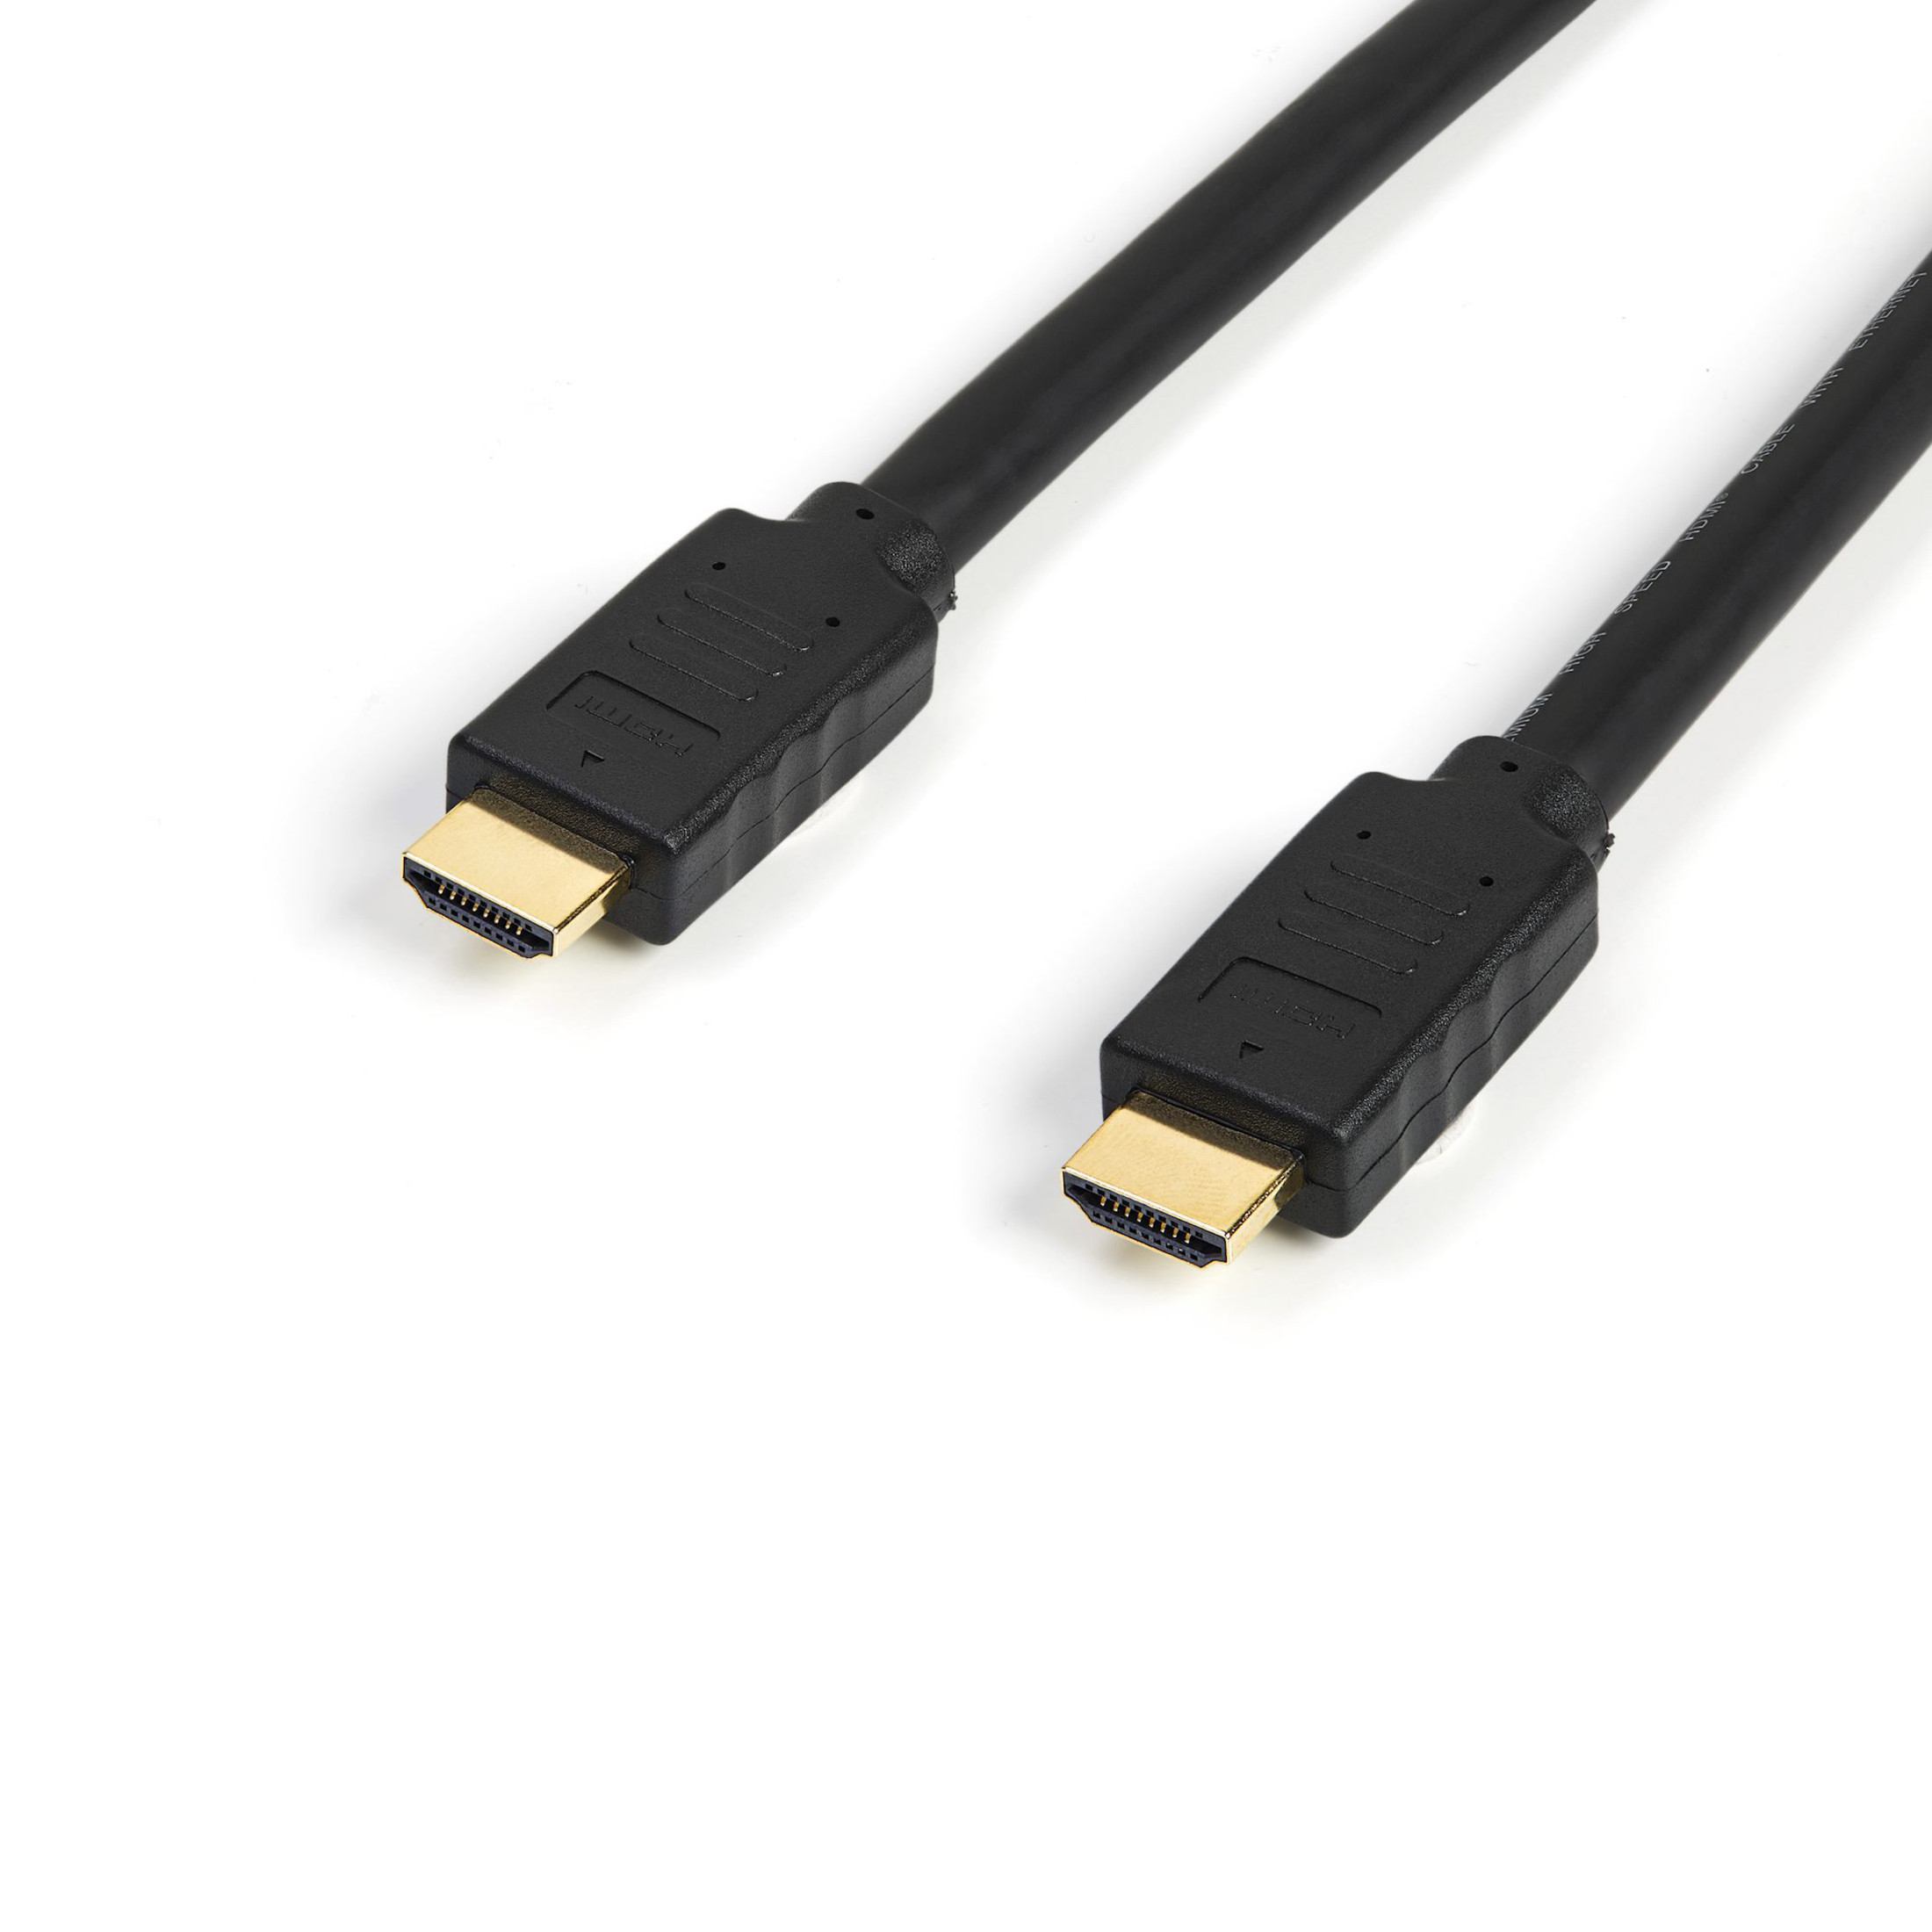 Omgekeerd Pedagogie indruk Startech .com 23ft (7m) Premium Certified HDMI 2.0 Cable with Ethernet,  High Speed Ultra HD 4K 60Hz HDMI Cable HDR10, UHD HDMI Monitor Cord22....  HDMM7MP - Corporate Armor